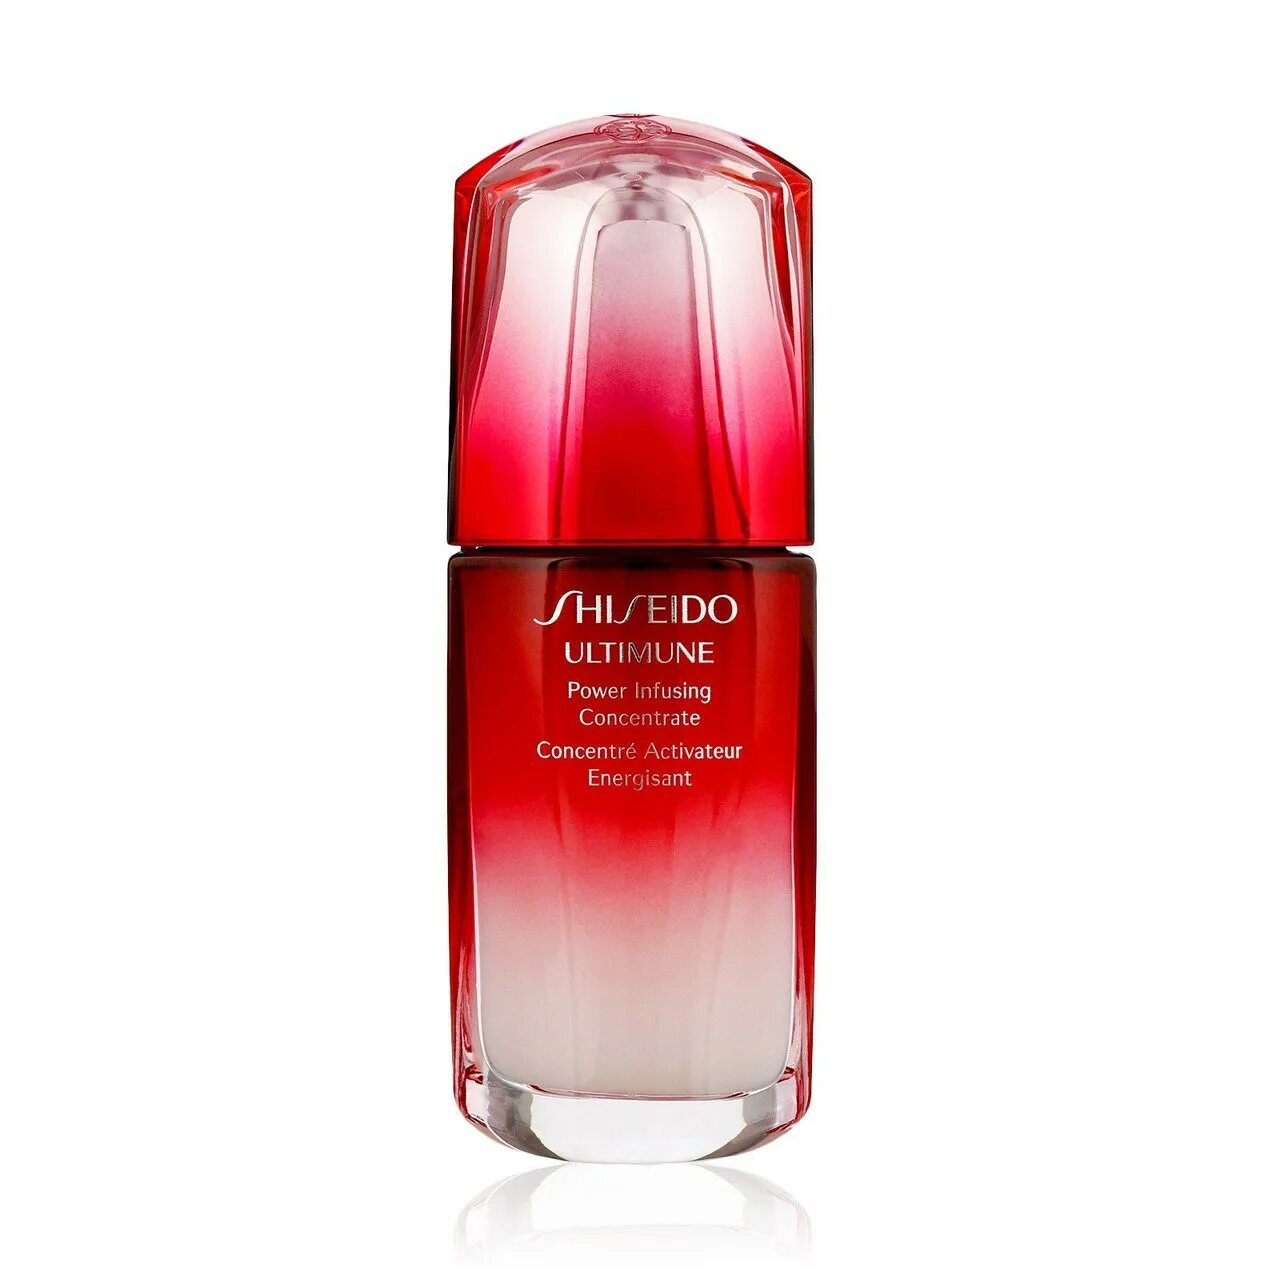 Shiseido Ultimune Power infusing Concentrate. Ultimune концентрат шисейдо. Ultimune концентрат шисейдо Power infusing. Концентрат Shiseido Ultimune Power infusing Concentrate. Shiseido power infusing concentrate